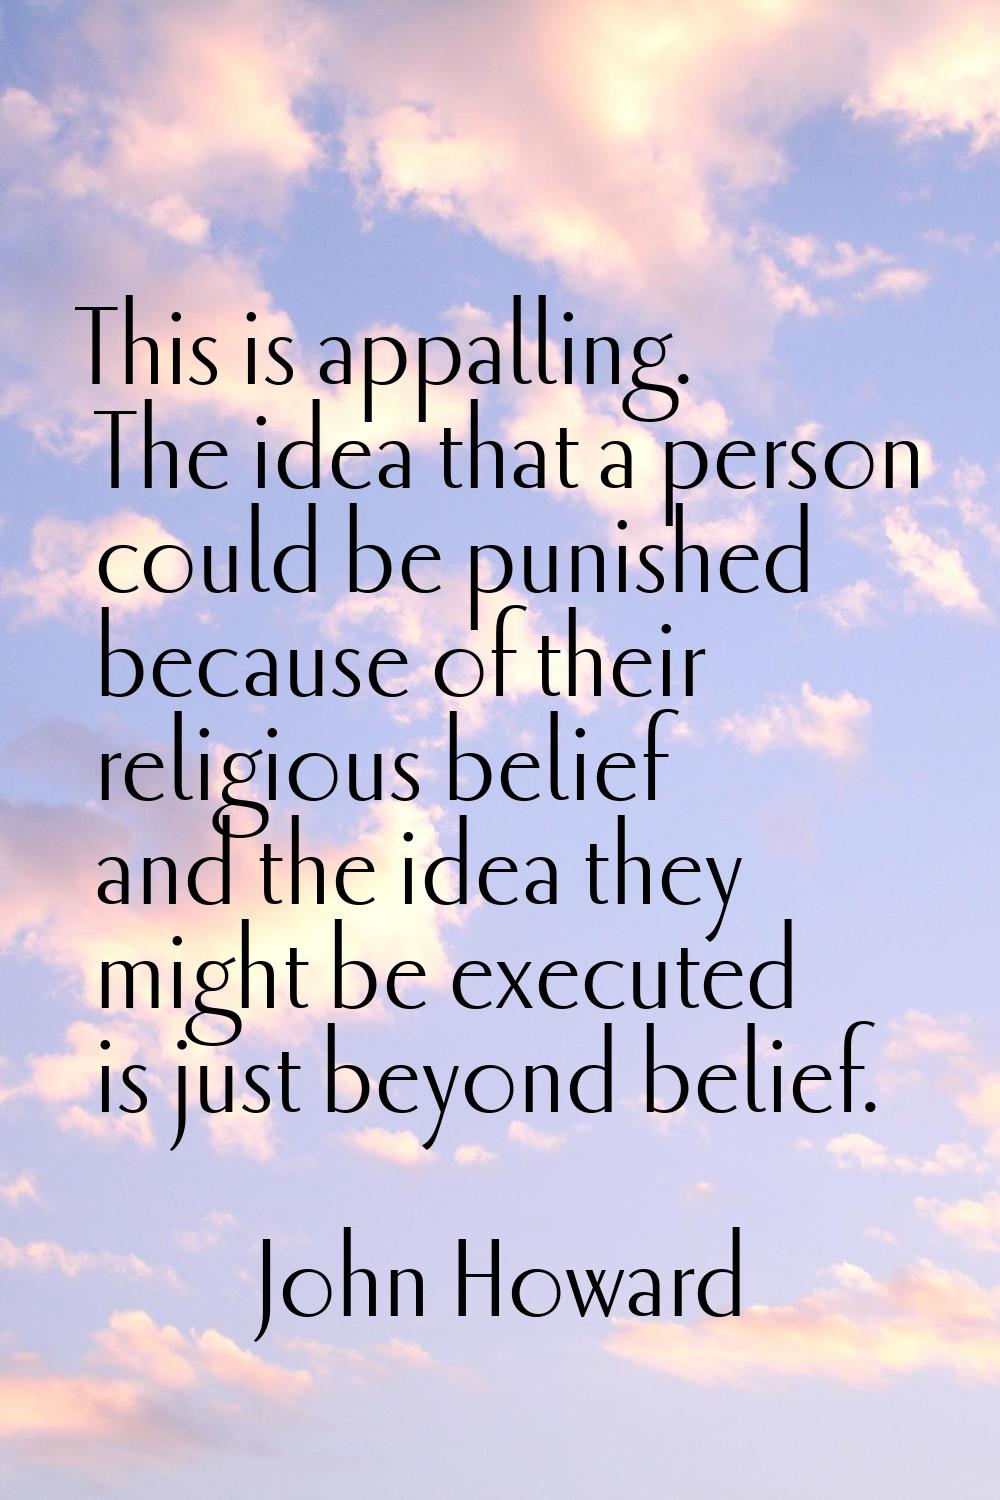 This is appalling. The idea that a person could be punished because of their religious belief and t